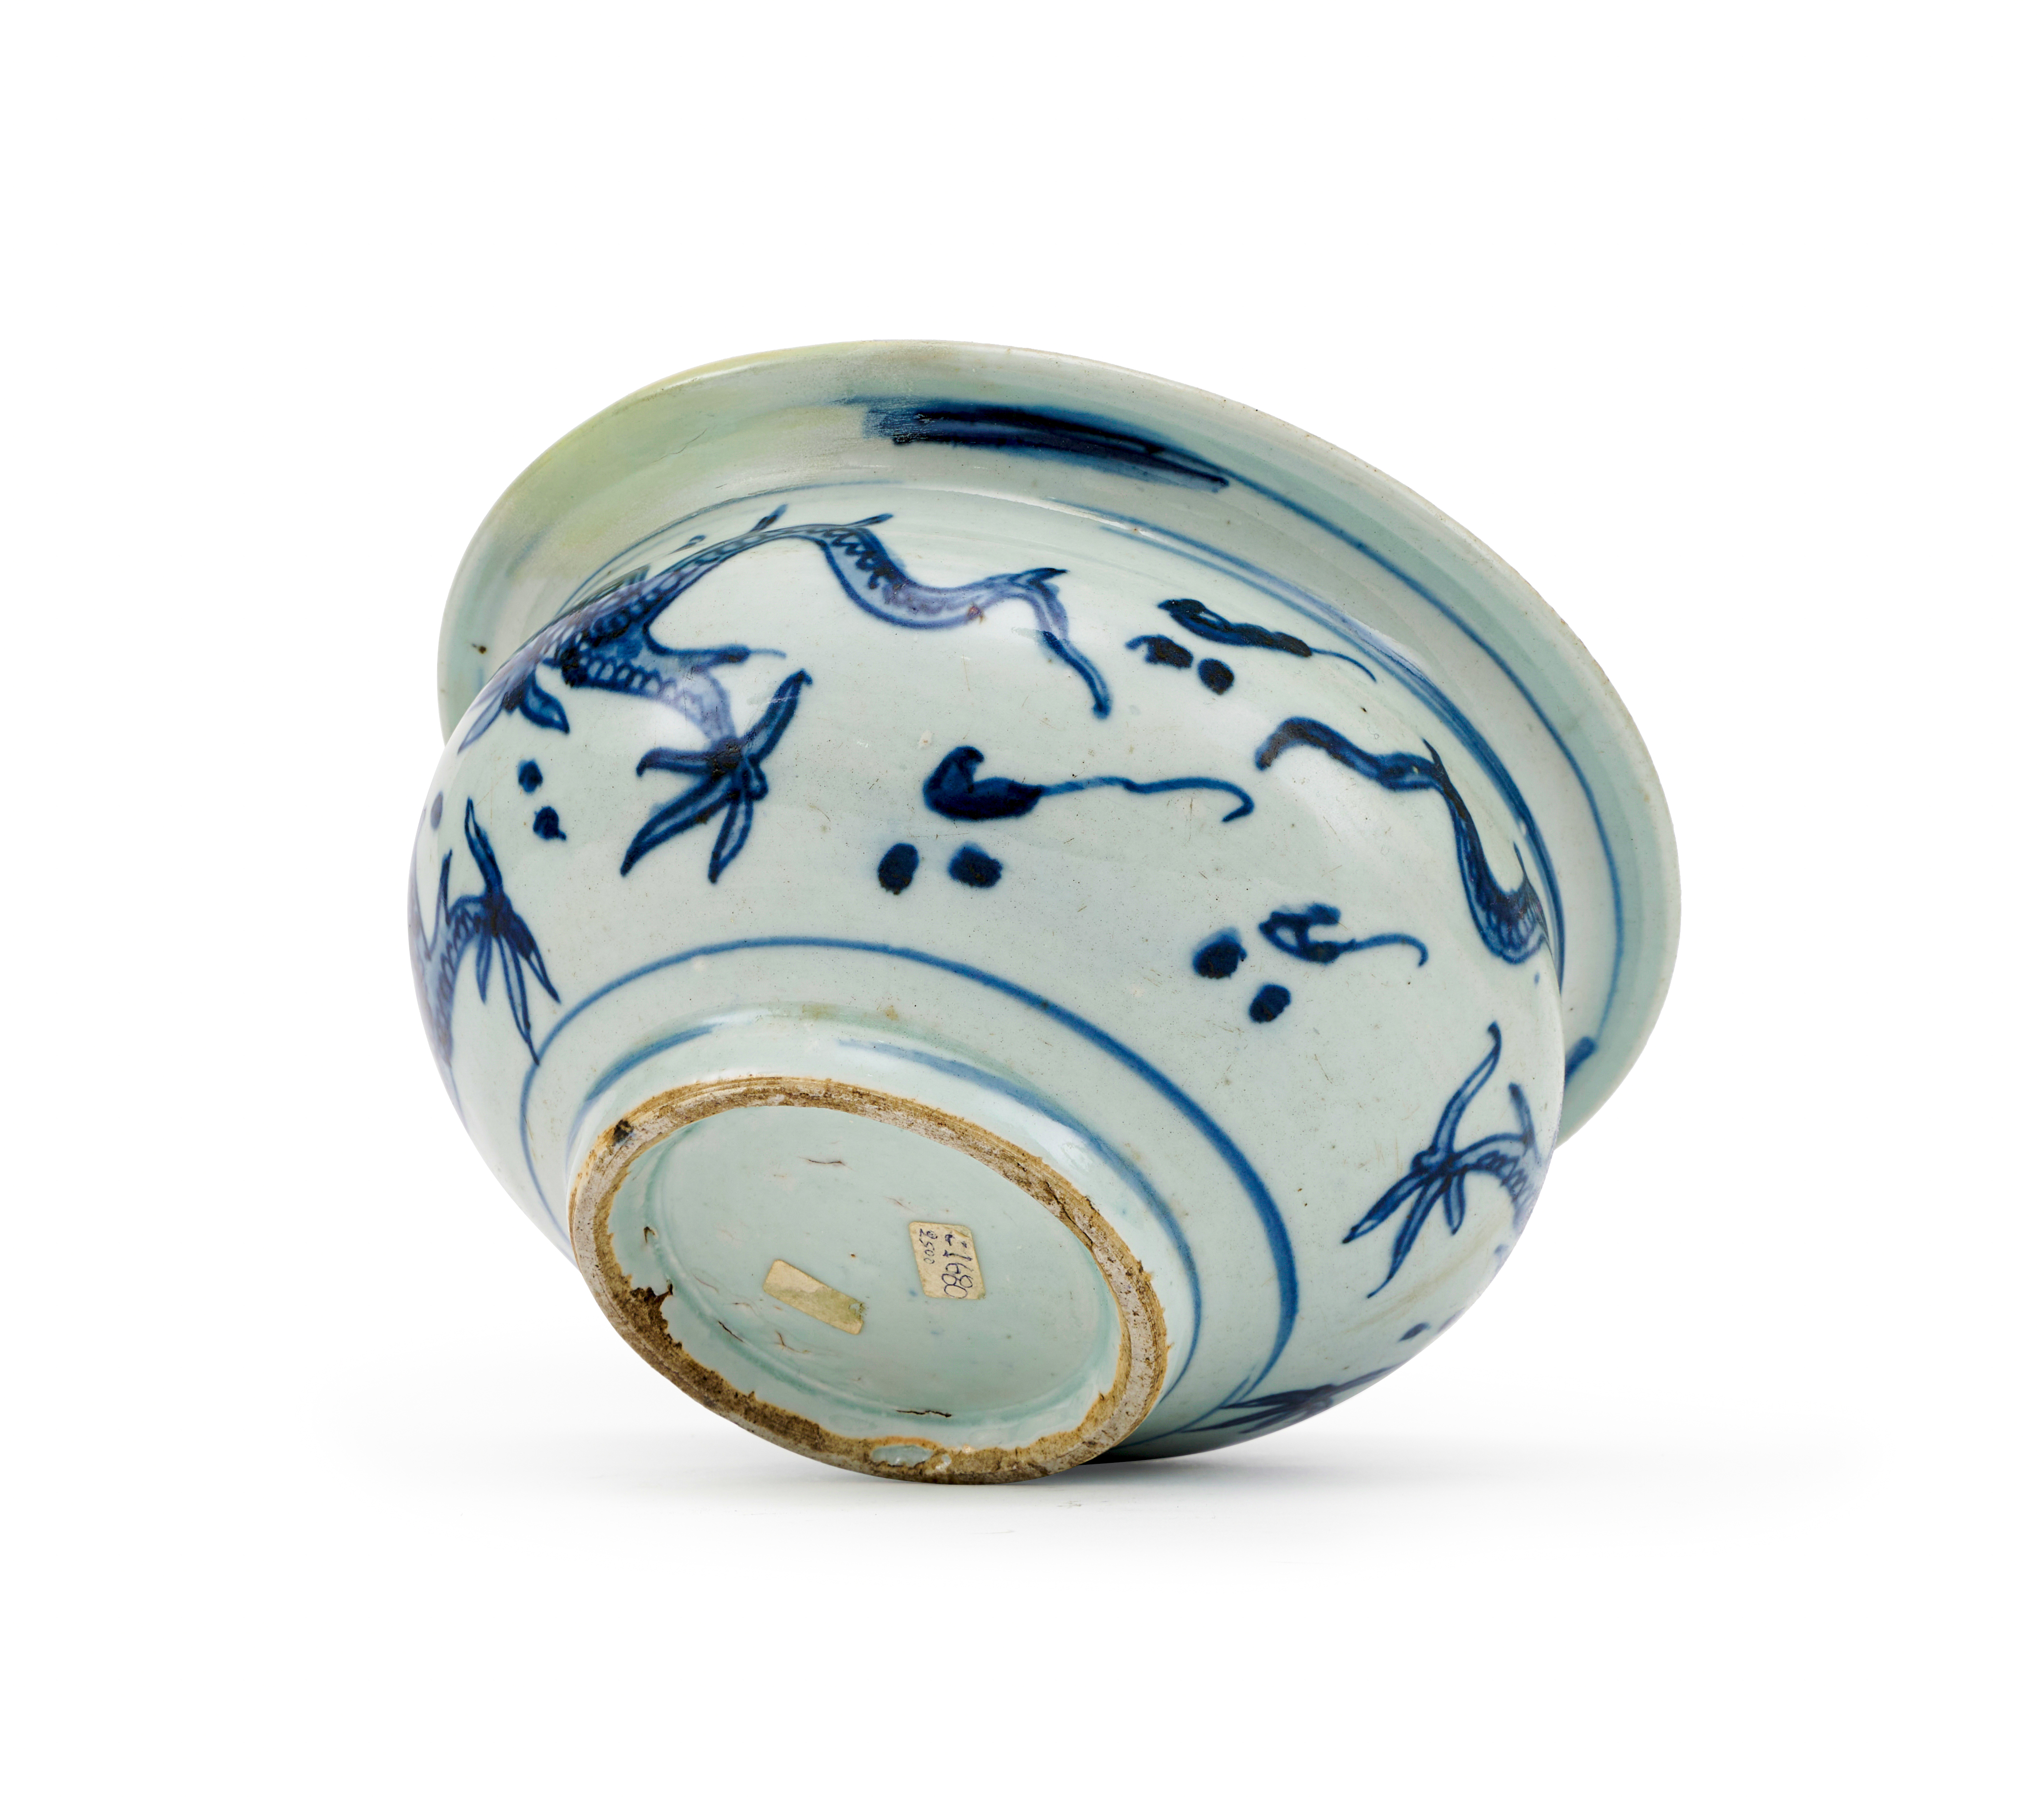 A CHINESE BLUE & WHITE CENSER, MING DYNASTY (1368-1644) - Image 4 of 5